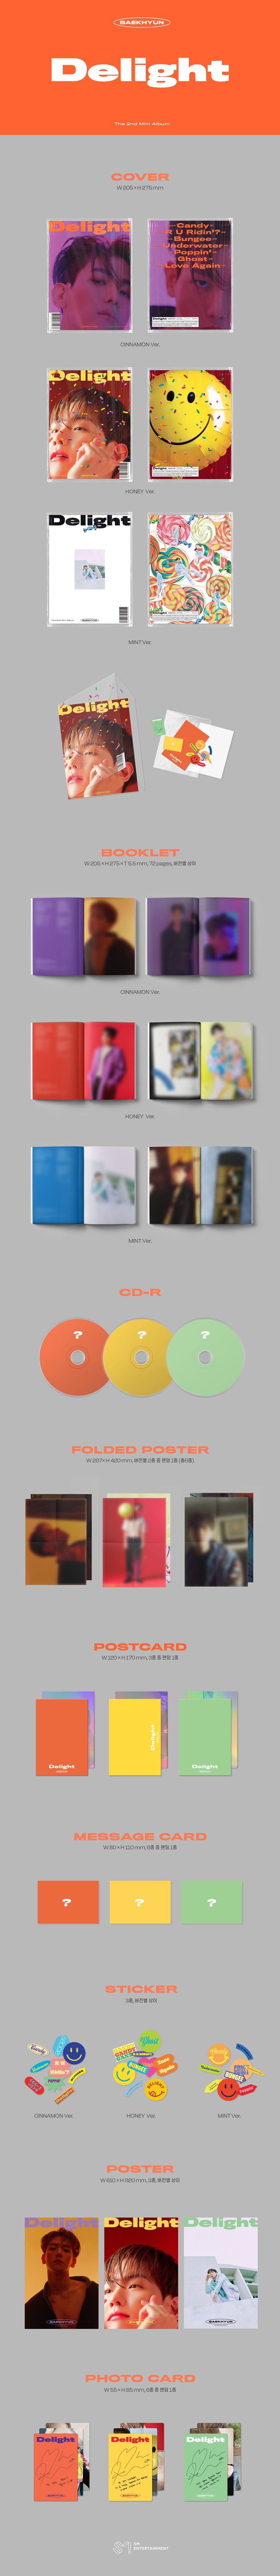 1 CD
1 Folding Poster
1 Booklet (72 pages)
1 Post
1 Photo Card
1 Message
1 Sticker